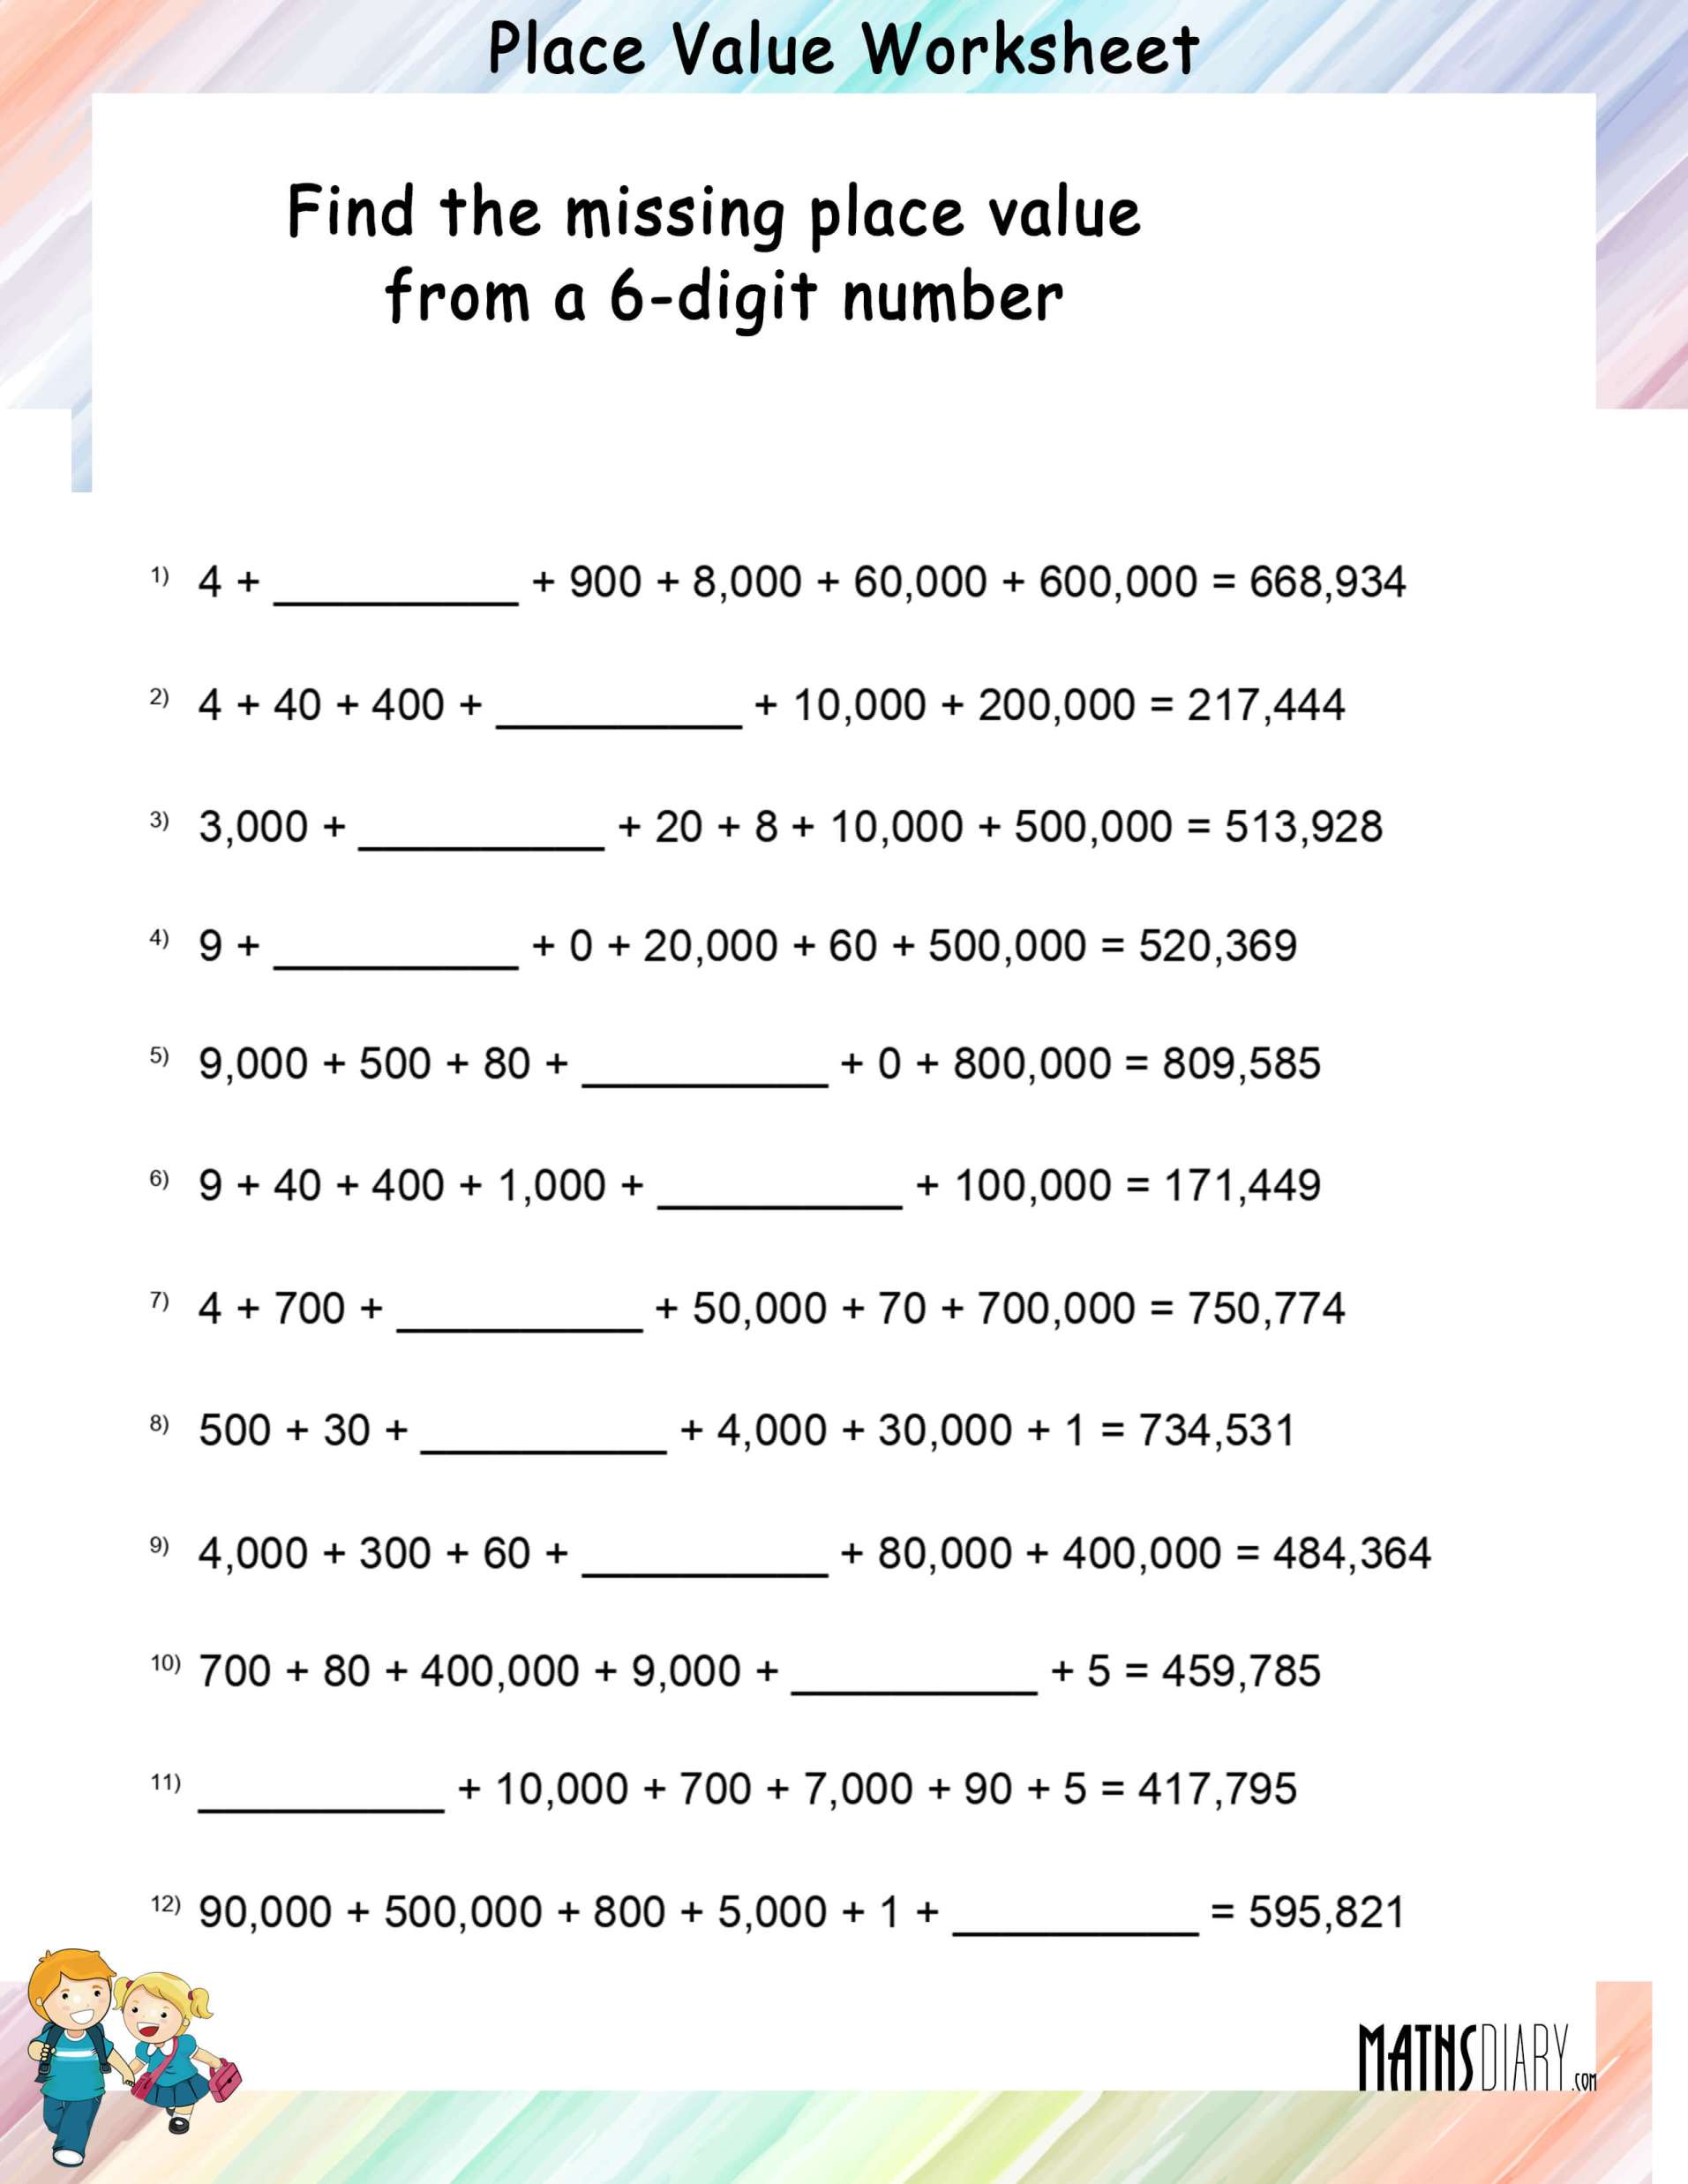 missing-place-value-from-a-6-digit-number-math-worksheets-mathsdiary